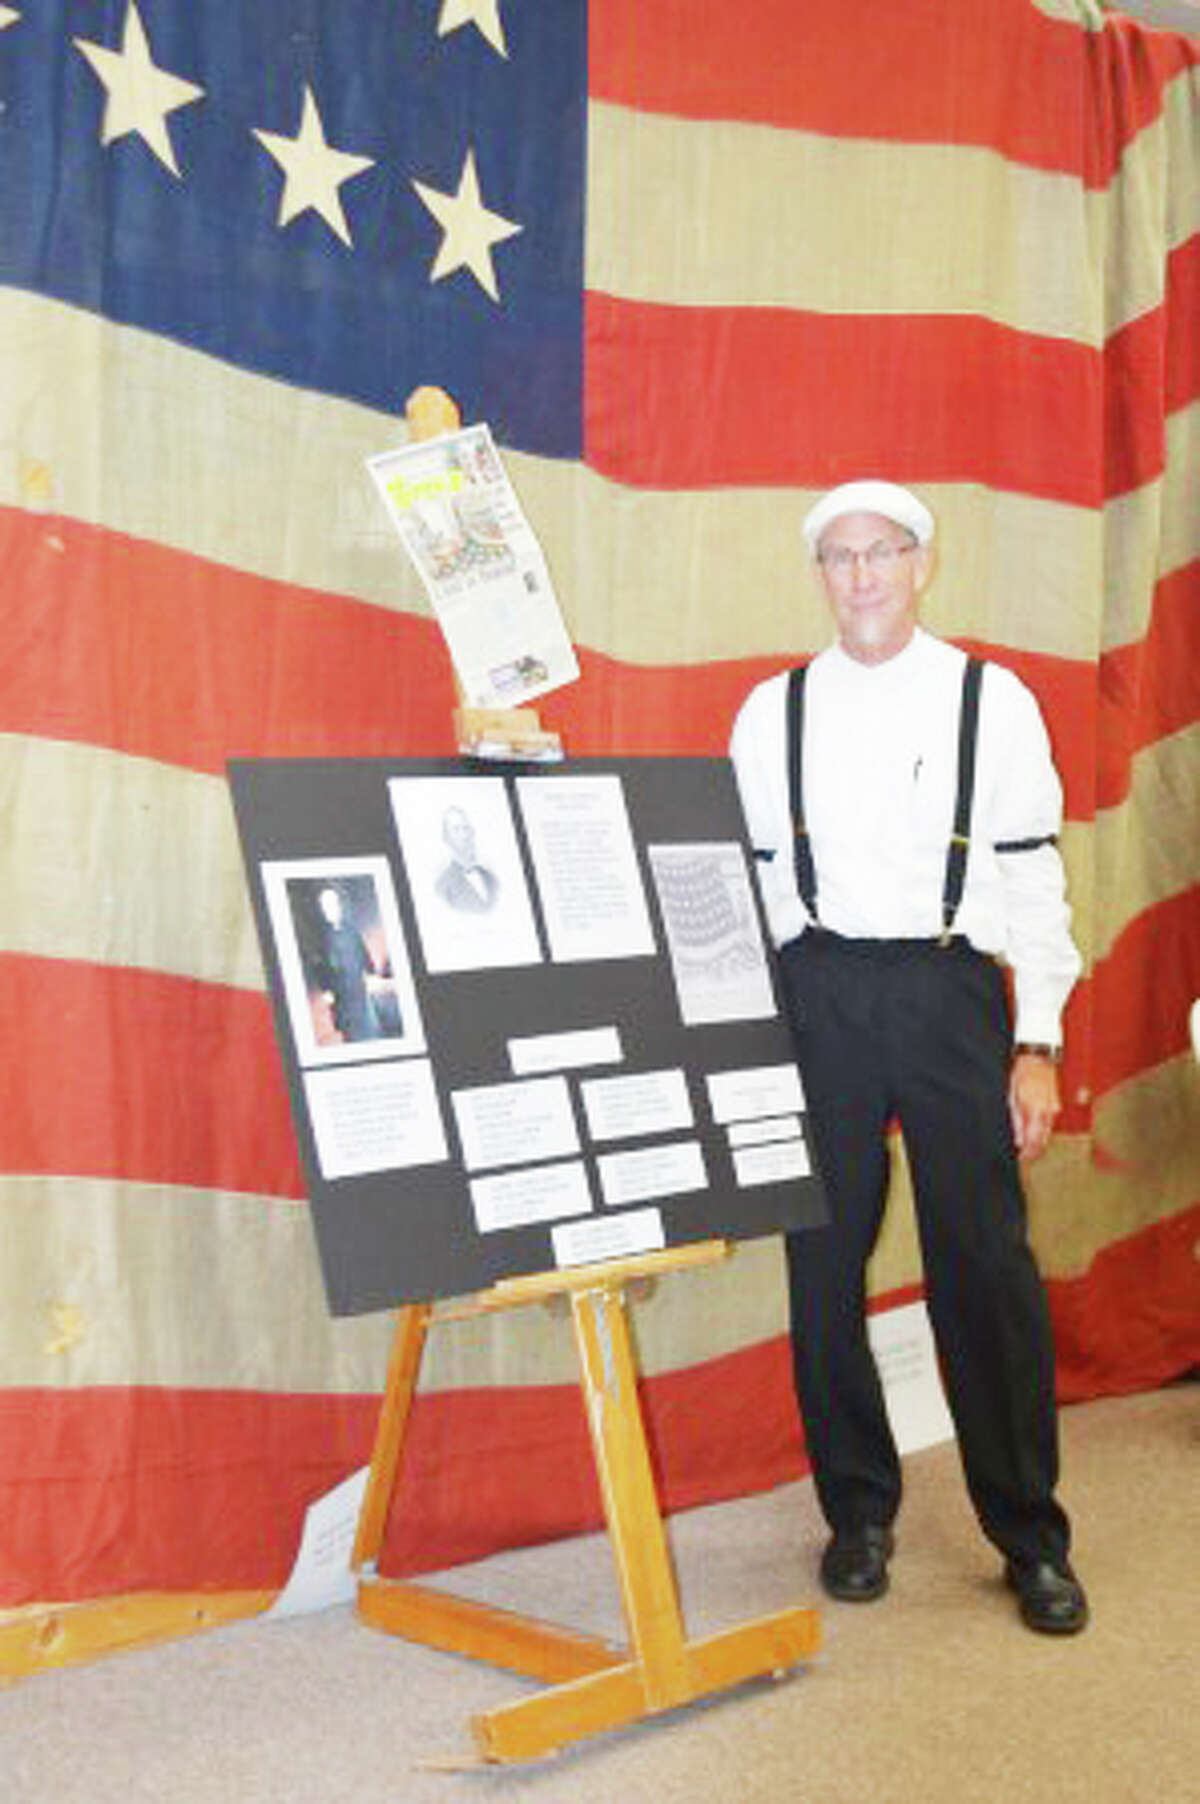 DRESSED THE PART: Lake County Historical Society President Bruce Micinski, dressed in vintage clothing, stands in front of an American flag from the 1870s during the annual Lake County History Day. (Courtesy photos)